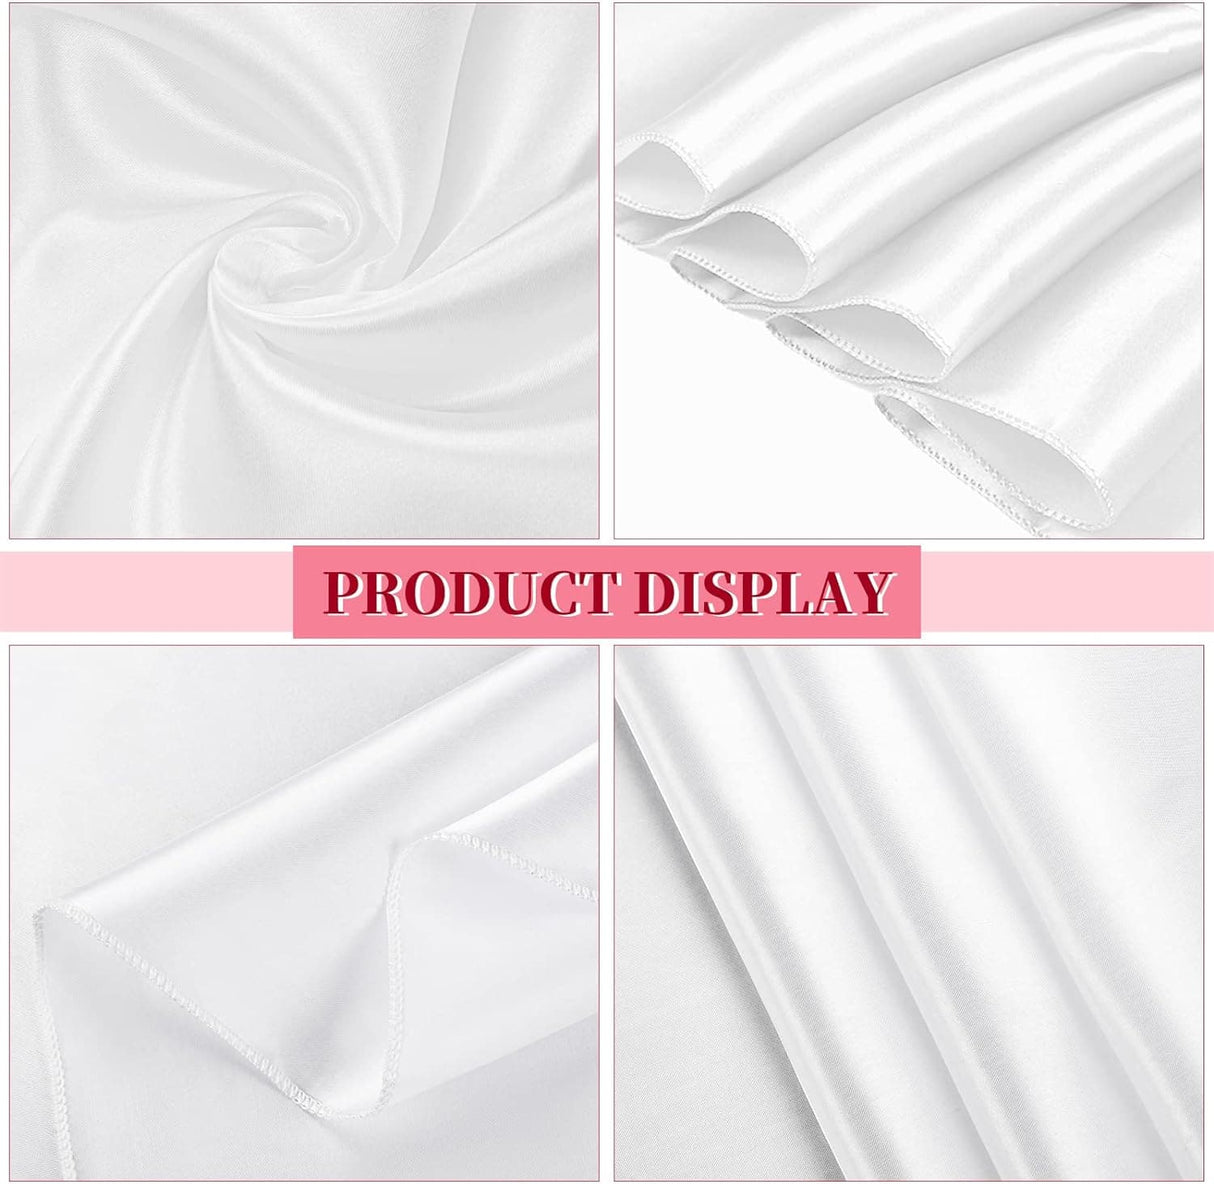 4 Packs Satin Tablecloth 108 Inch Round Silky Black Satin Tablecloth 108inch Bright Tablecloth Smooth Fabric Table Decoration for Parties Holiday Wedding Birthday Banquet